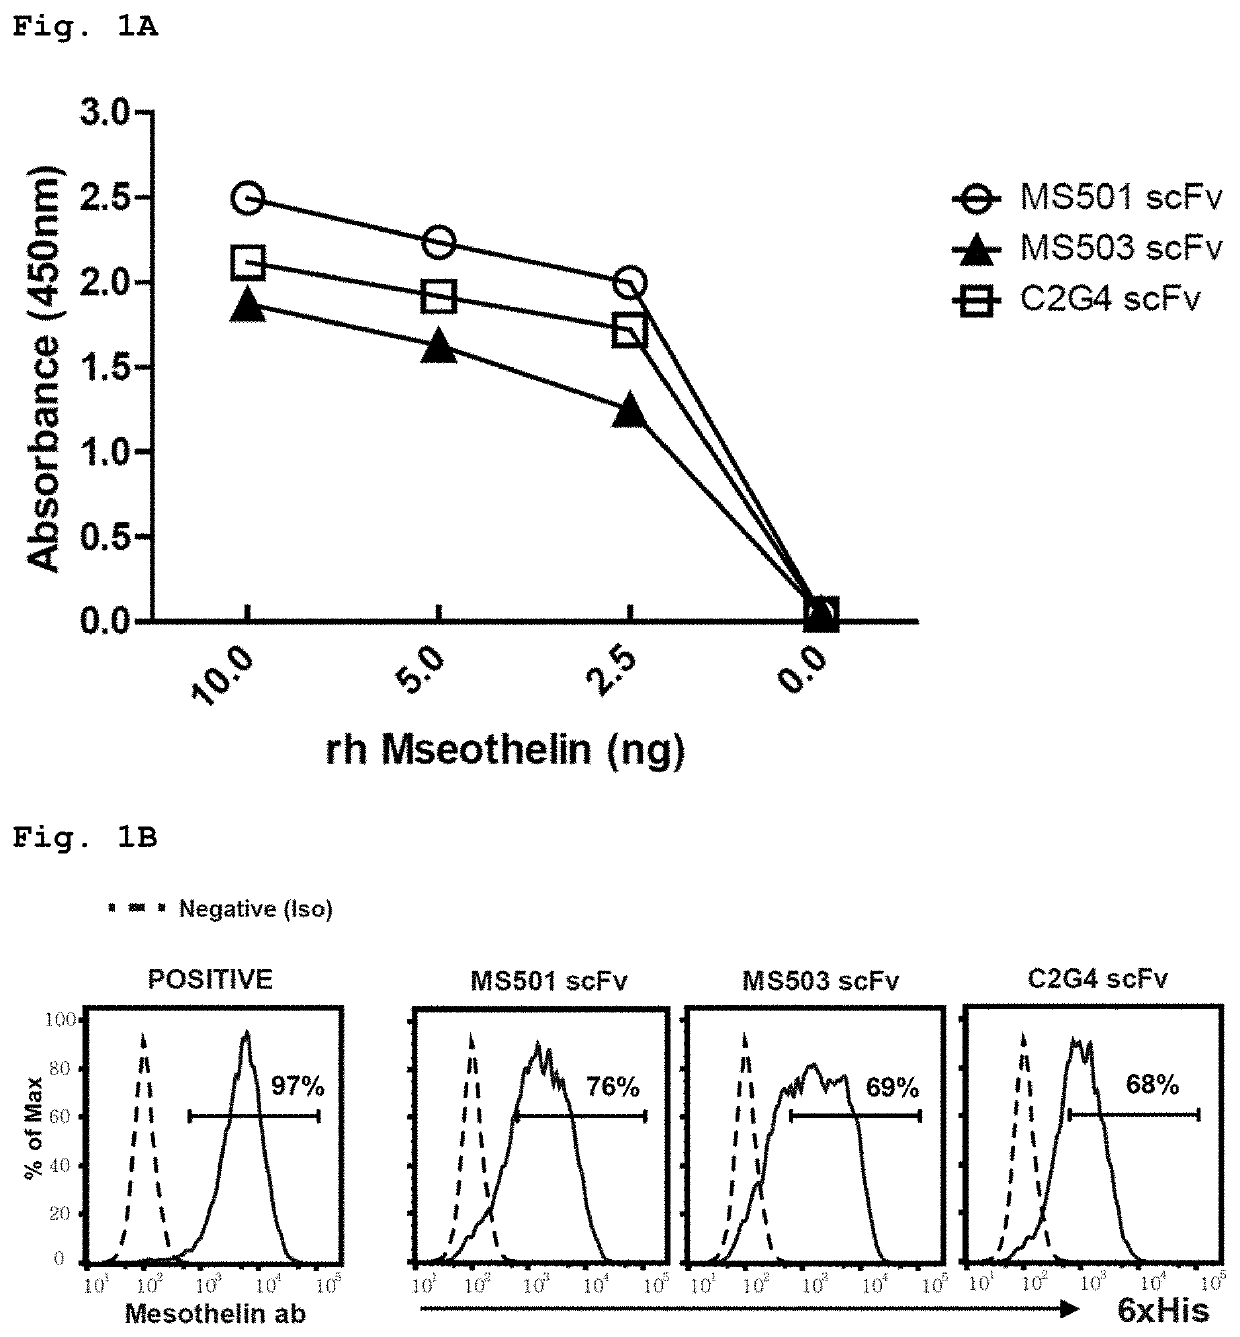 Mesothelin-specific chimeric antigen receptor and t cells expressing same